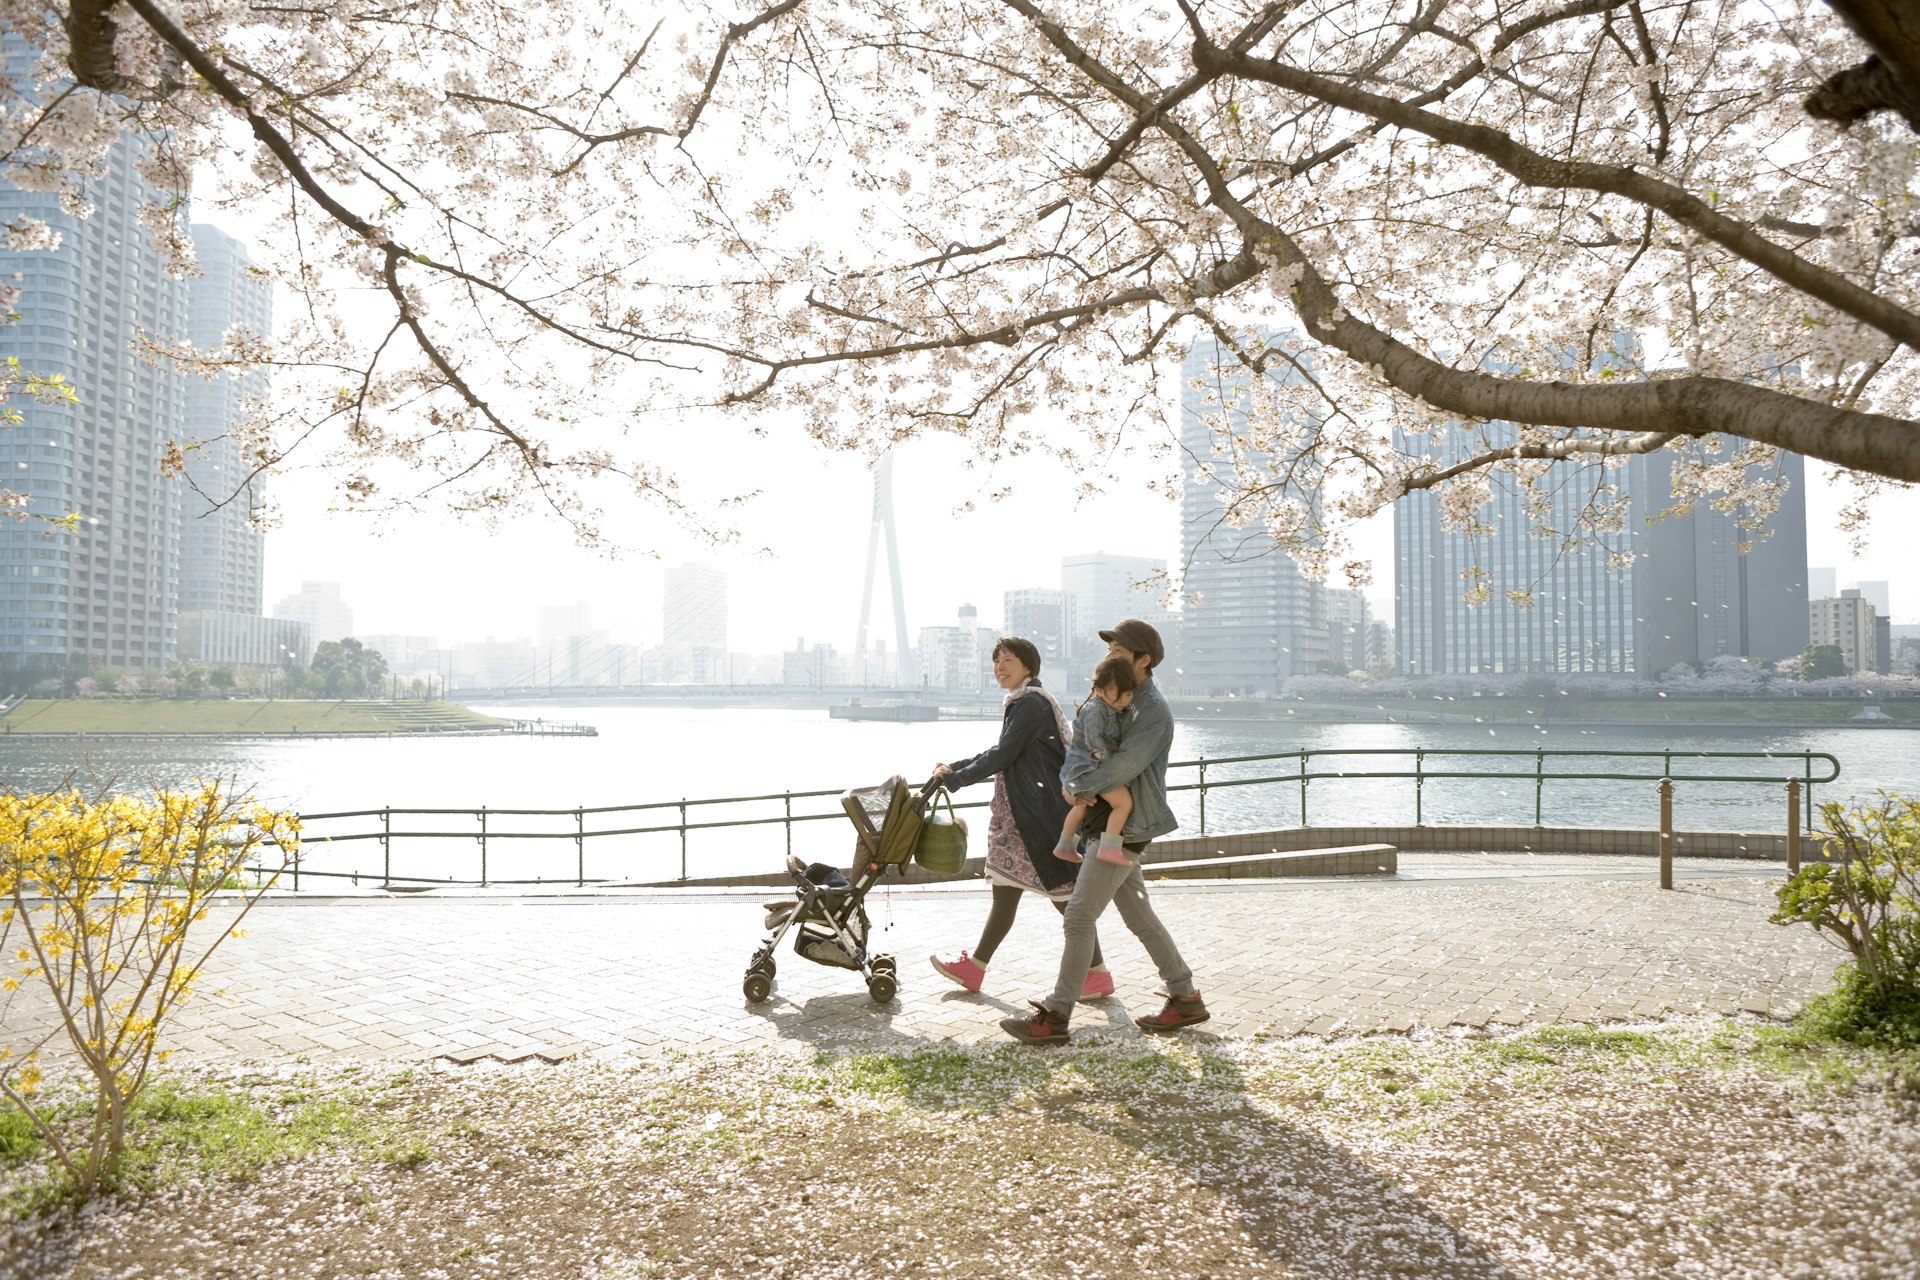 A family with a stroller walk along a path beside a river under cherry blossom